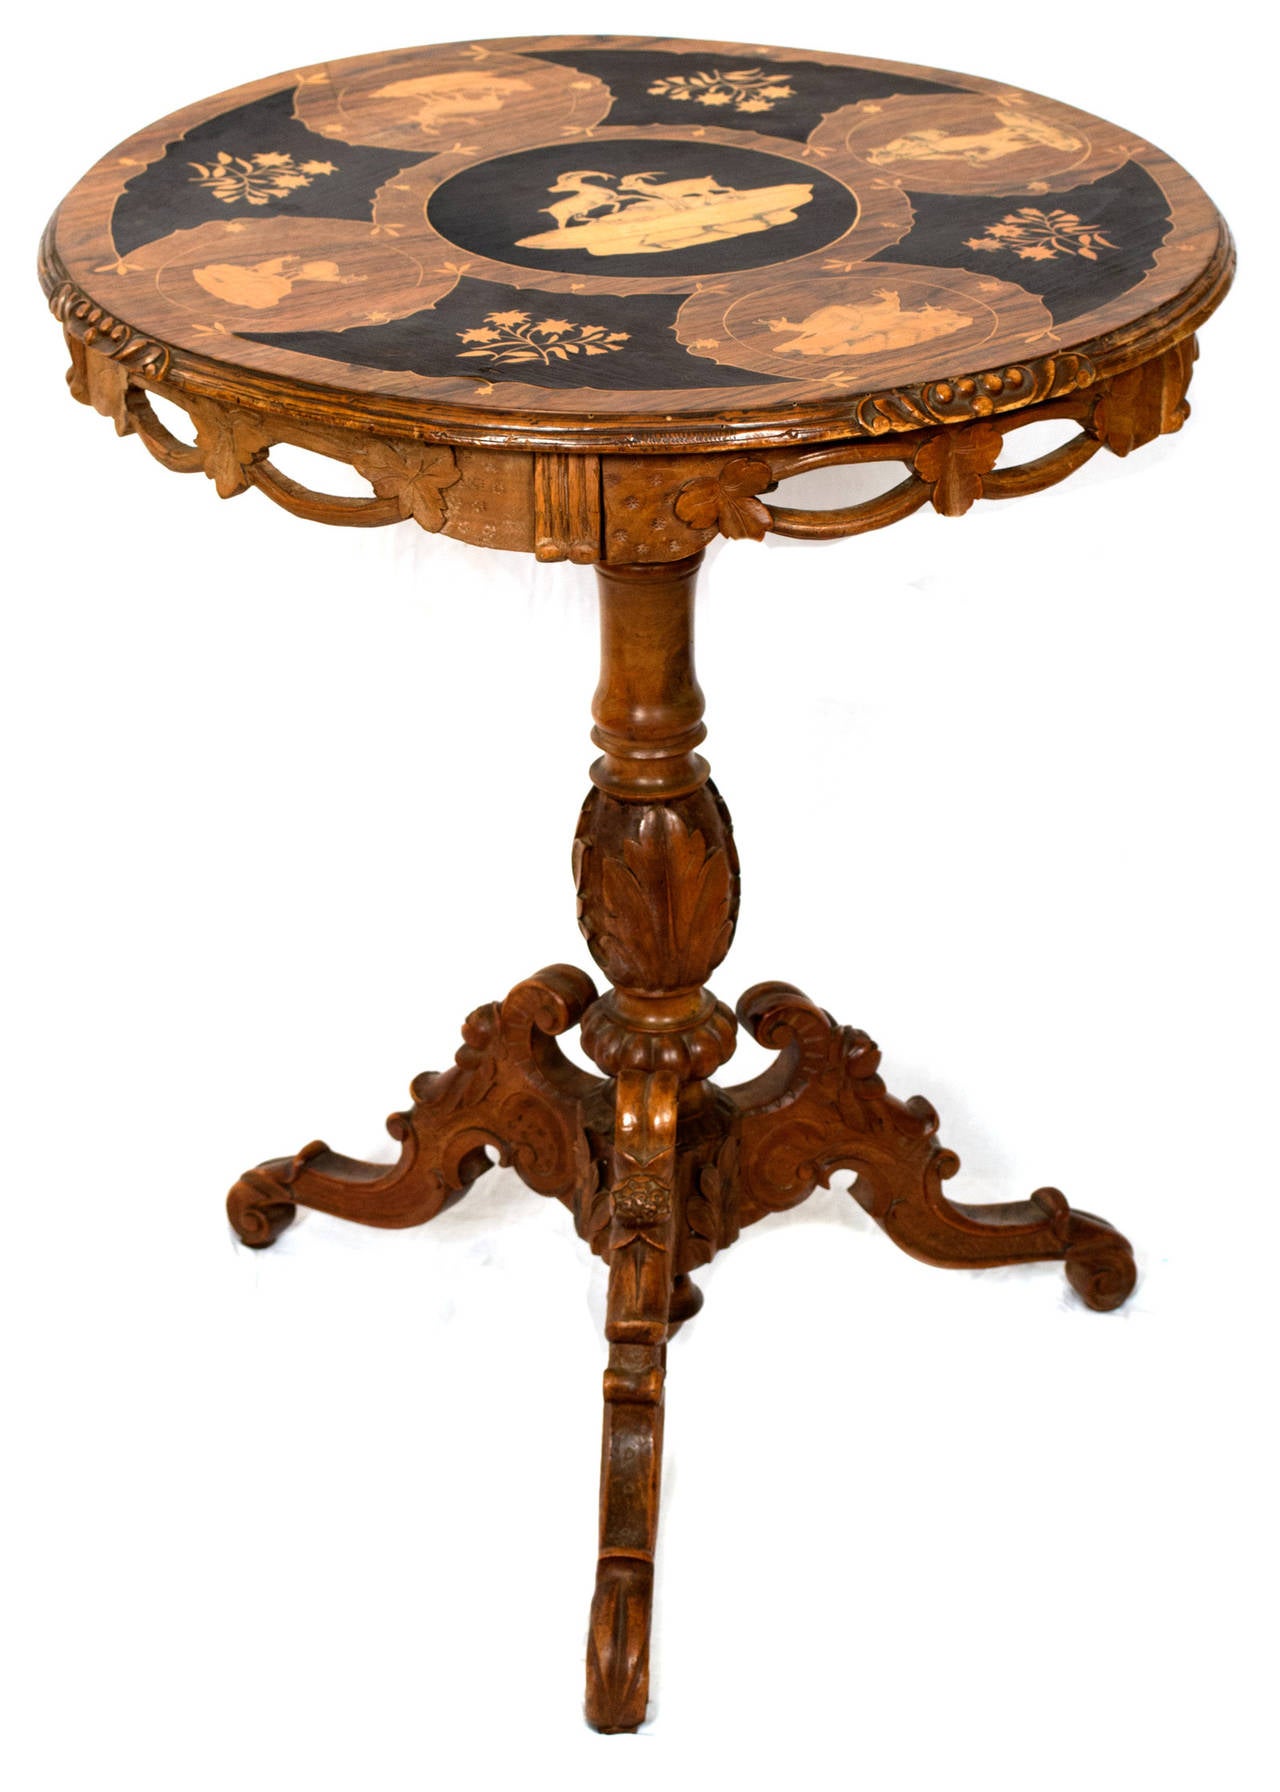 A late 19th century circular occasional table made in Switzerland; the top featuring five beautiful marquetry panels of chamois and other animal groupings and interposed with floral sprays in exotic, fruit and ebonized woods. The skirt of the table